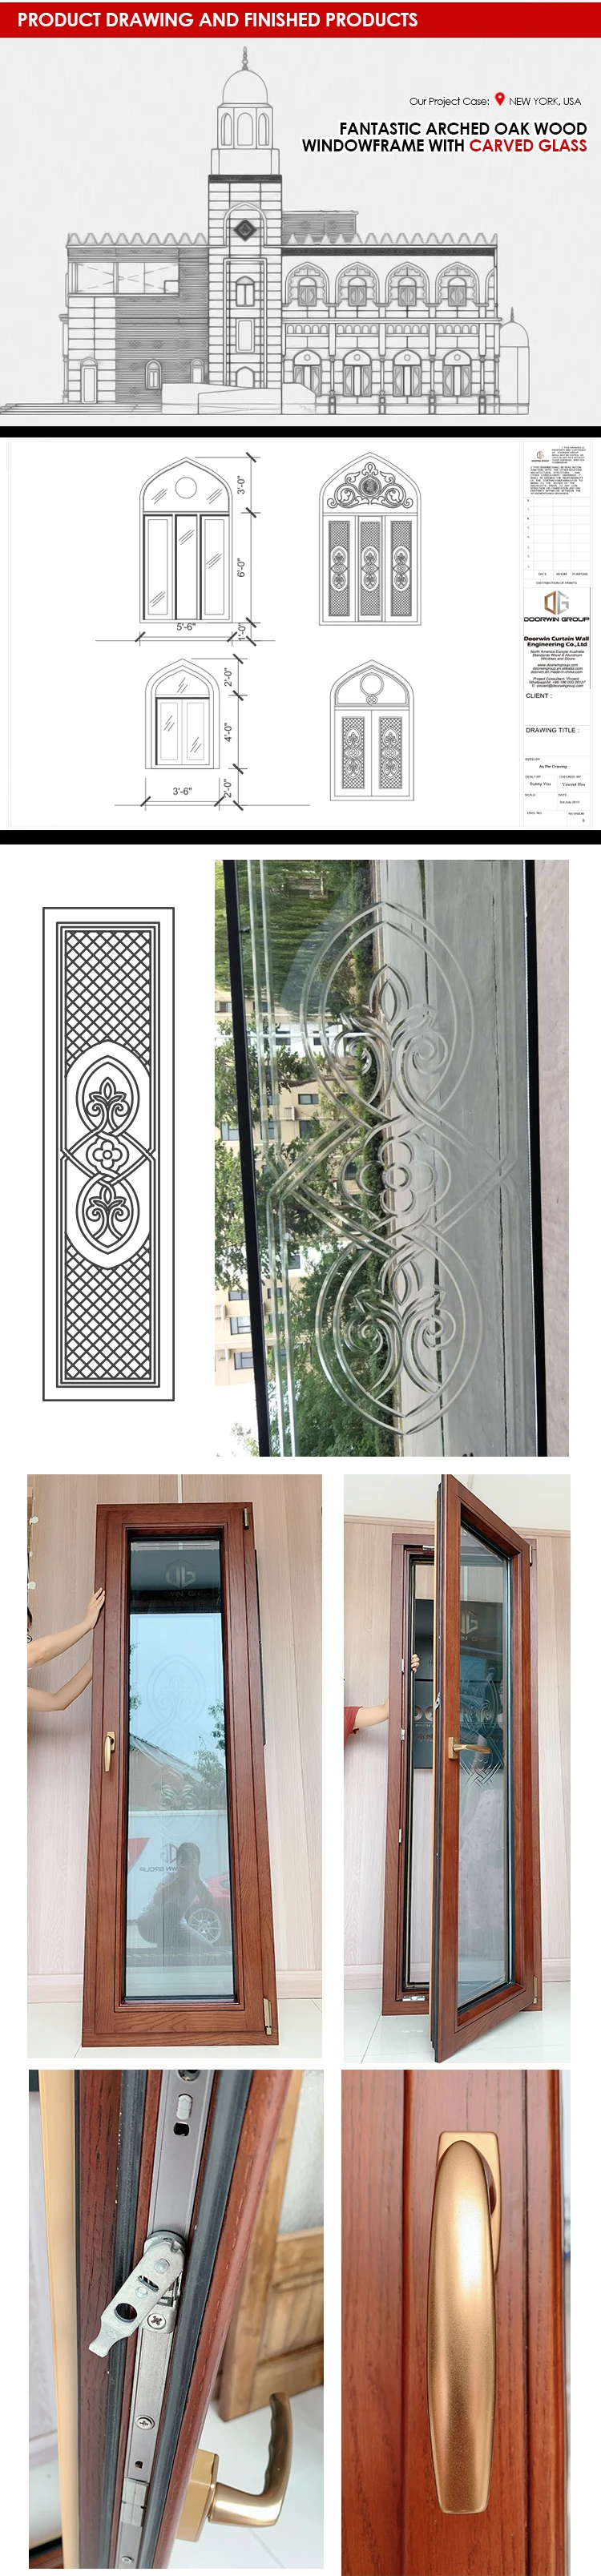 China Manufactory window with round top